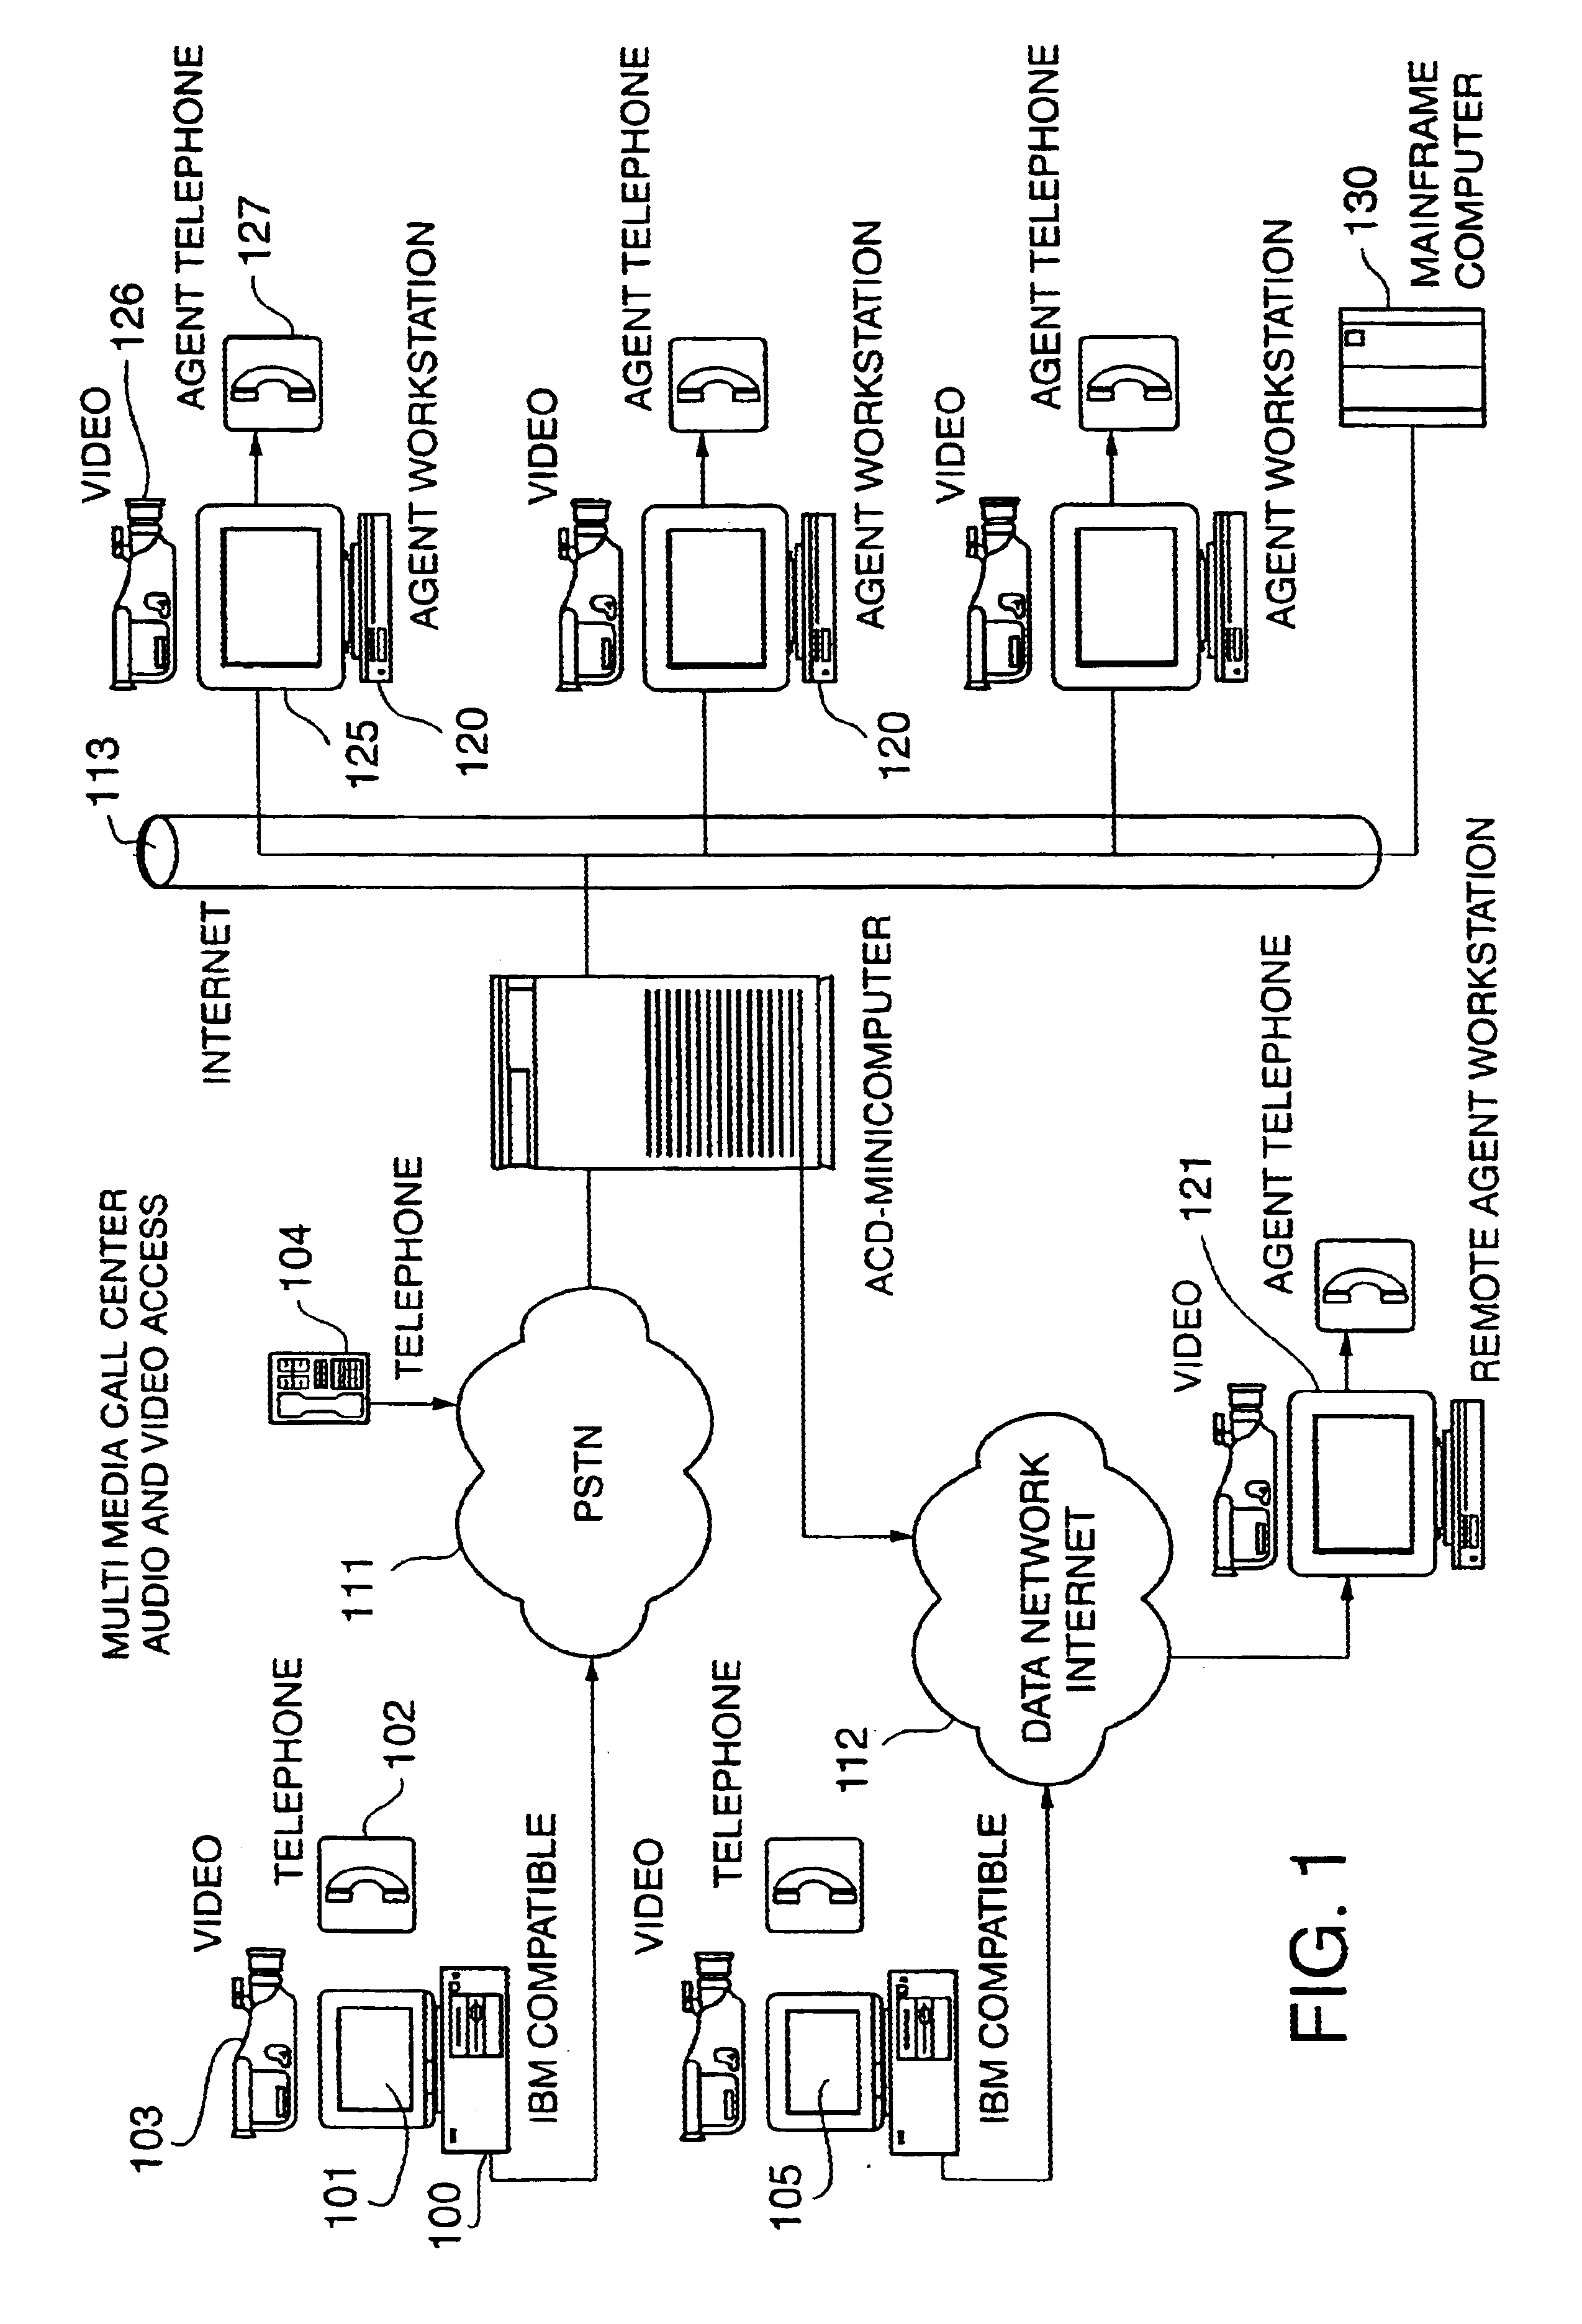 Multimedia telecommunication automatic call distribution system using internet/PSTN call routing